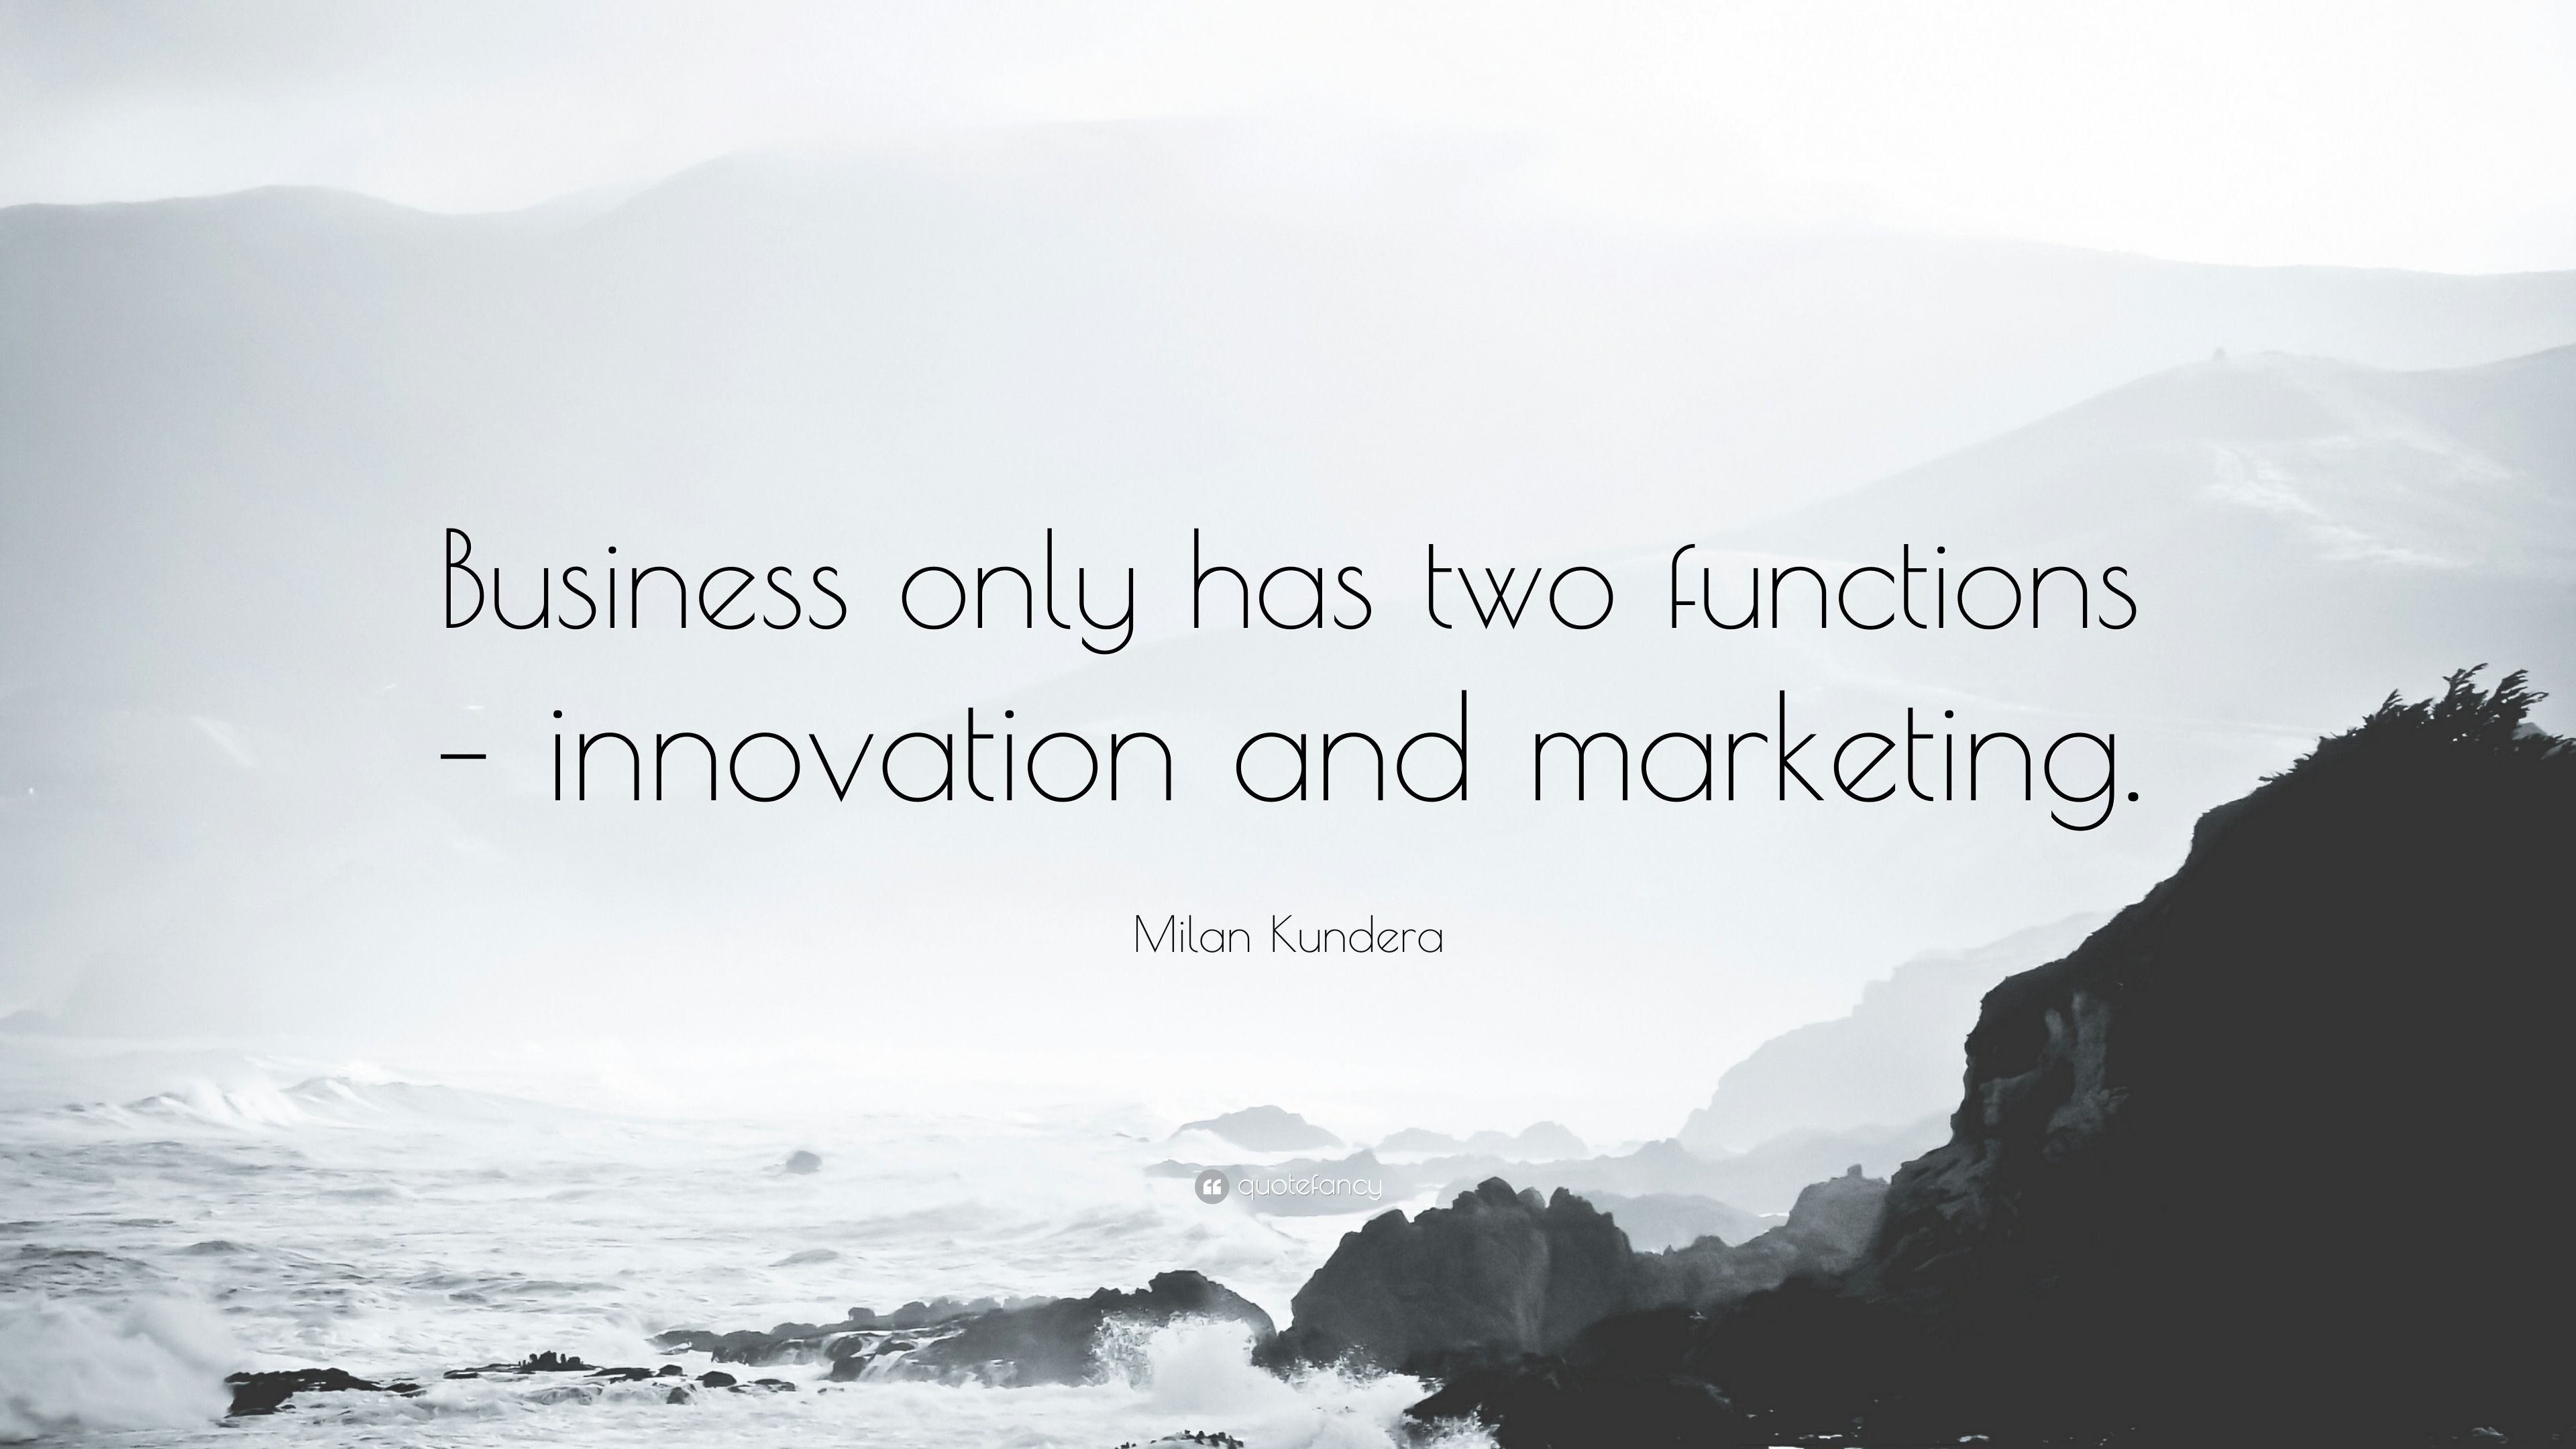 Marketing Quotes (40 wallpapers) - Quotefancy